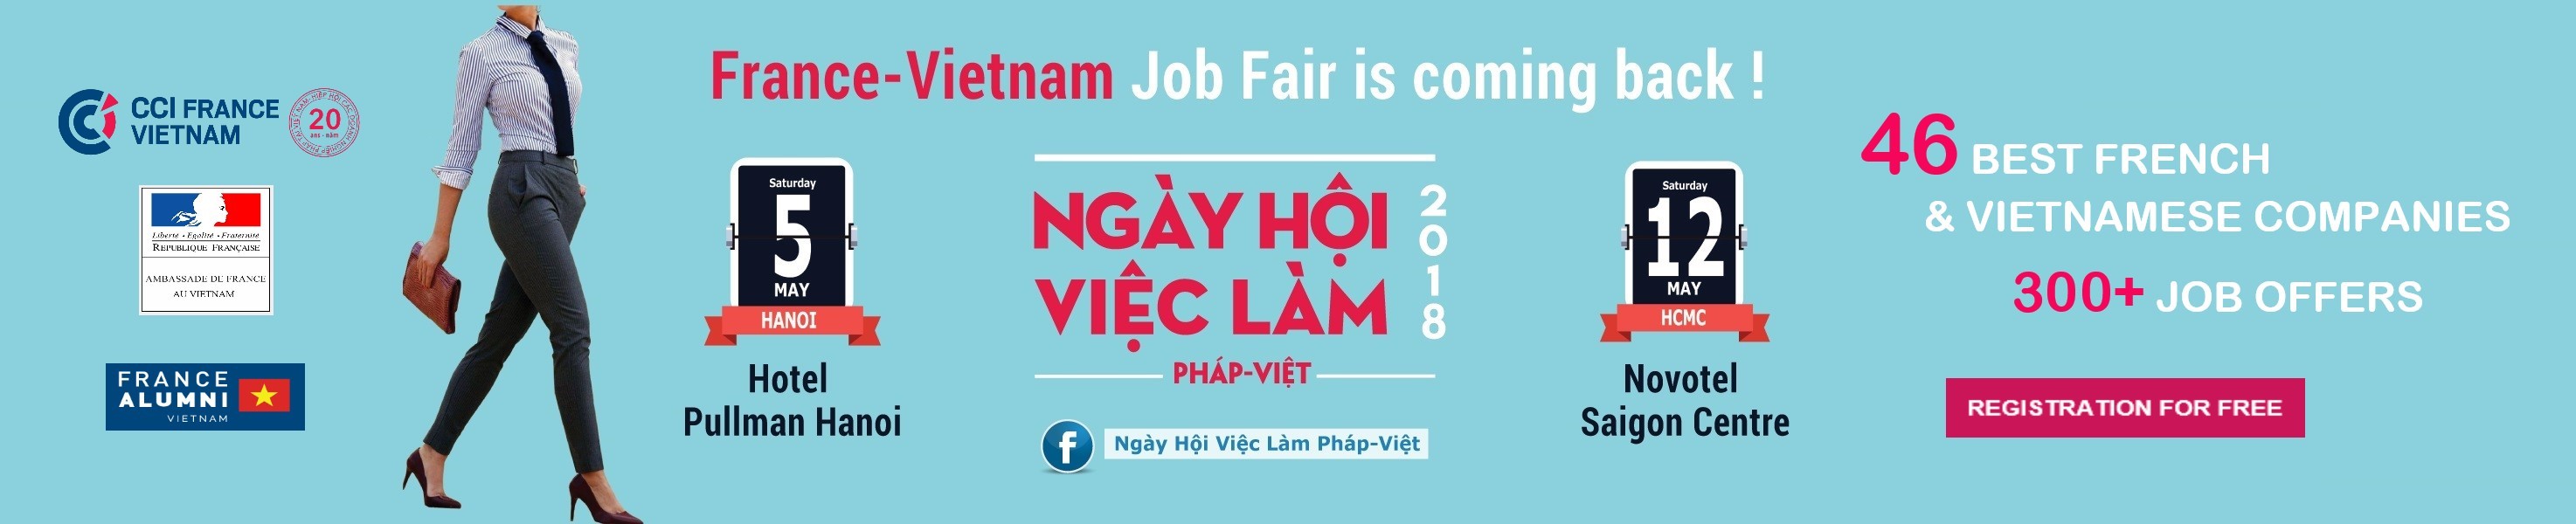 CCIFV - French Chamber of Commerce and Industry in Vietnam